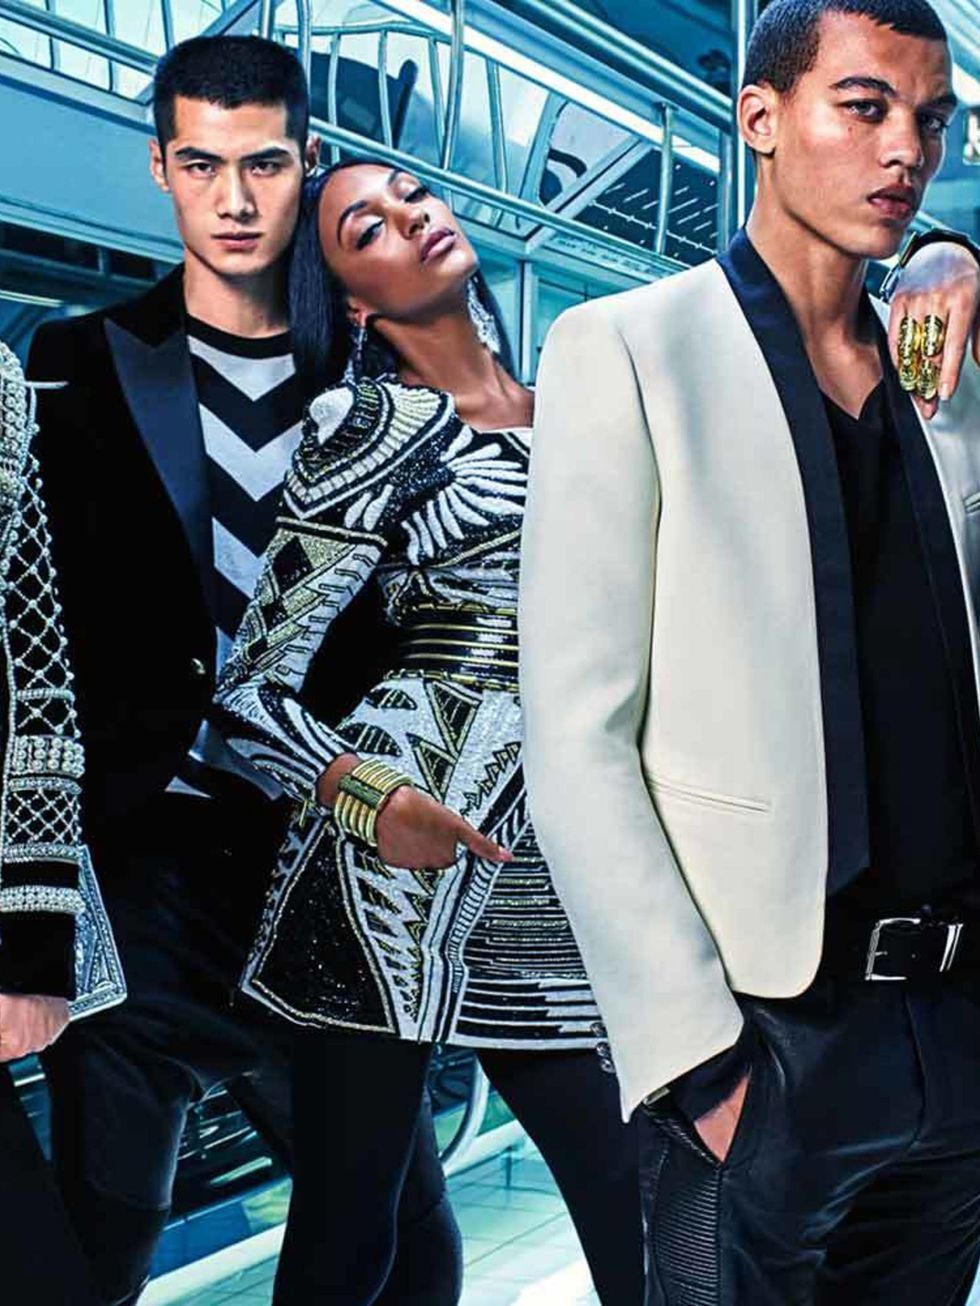 Gigi Hadid, Hao Yun Xiang, Jourdan Dunn, Dudley O'Shaughnessy and Kendall Jenner star in the new H&M X Balmain campaign, photographed by Mario Sorrenti, September 2015.